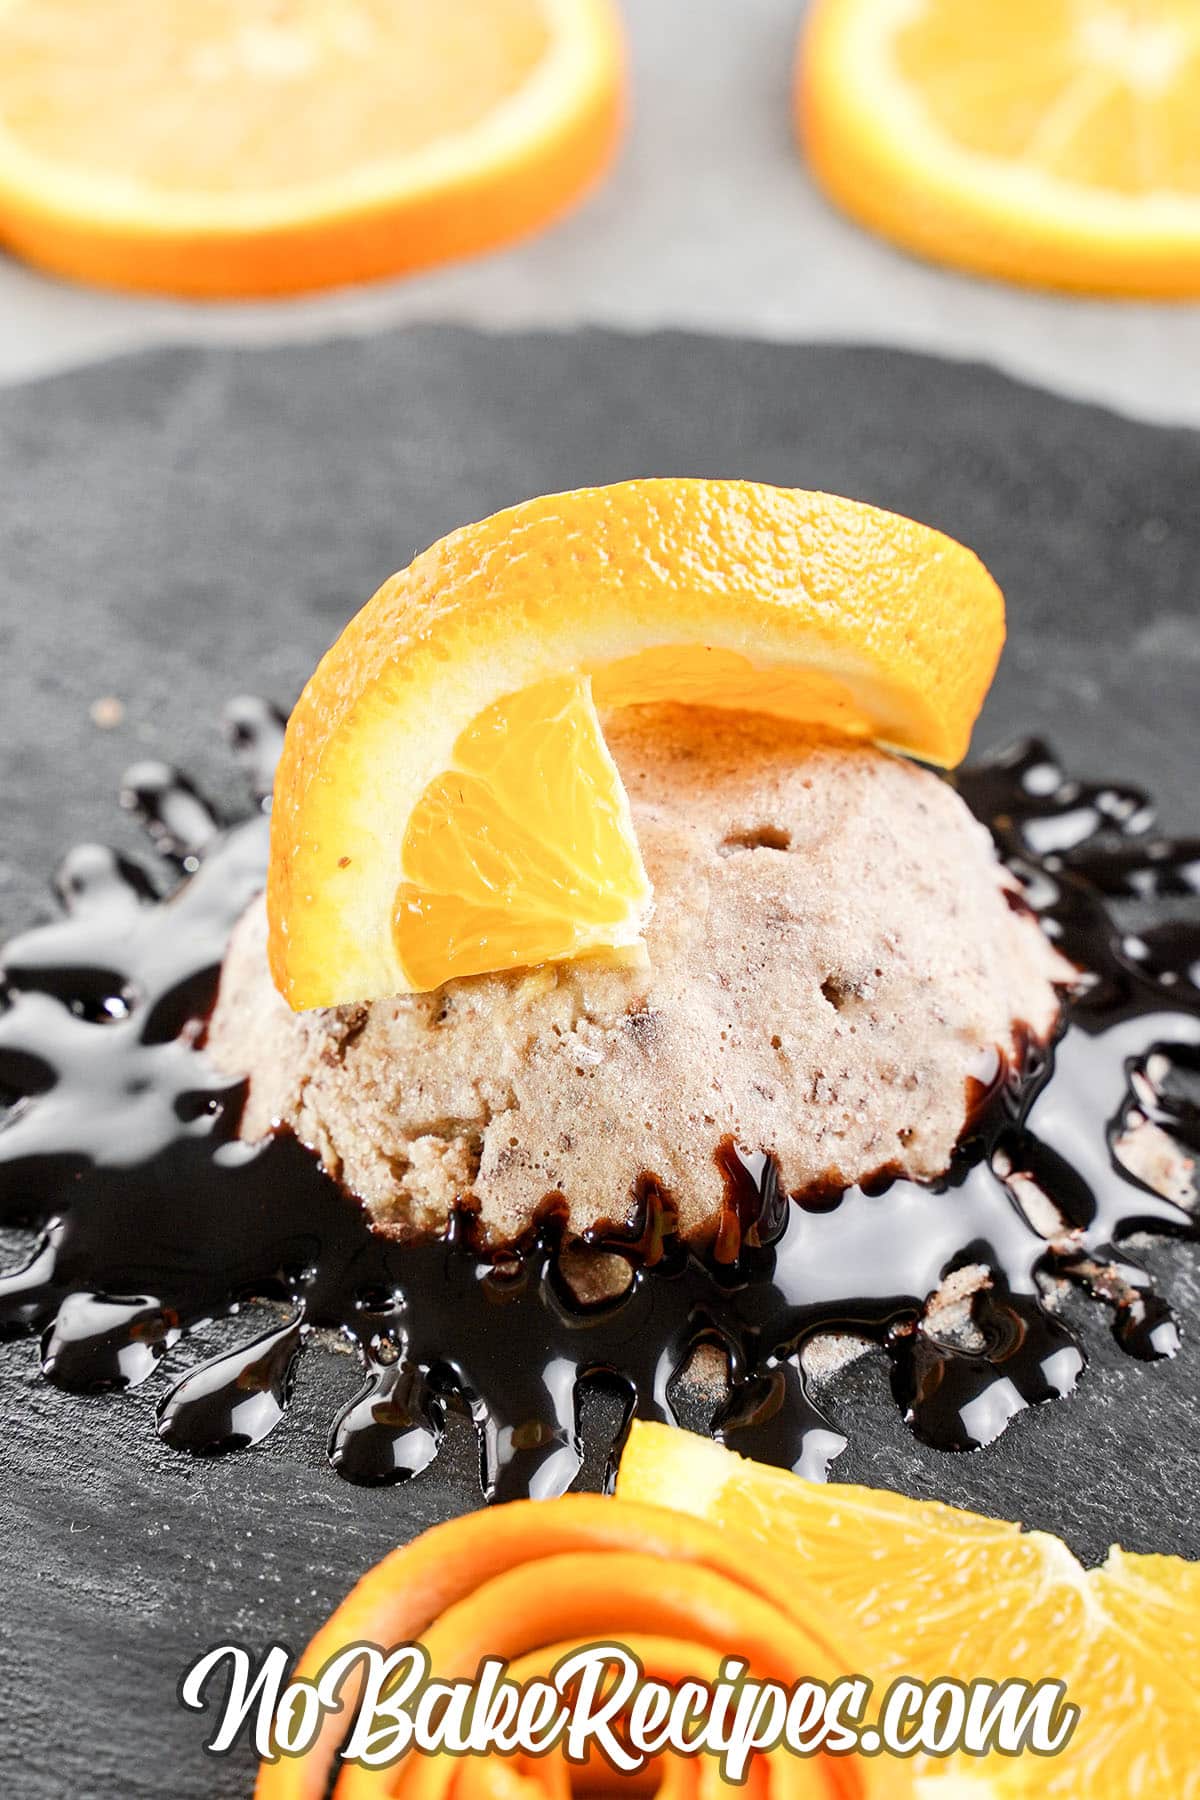 scoop of banana chocolate ice cream on a plate with chocolate and orange slices